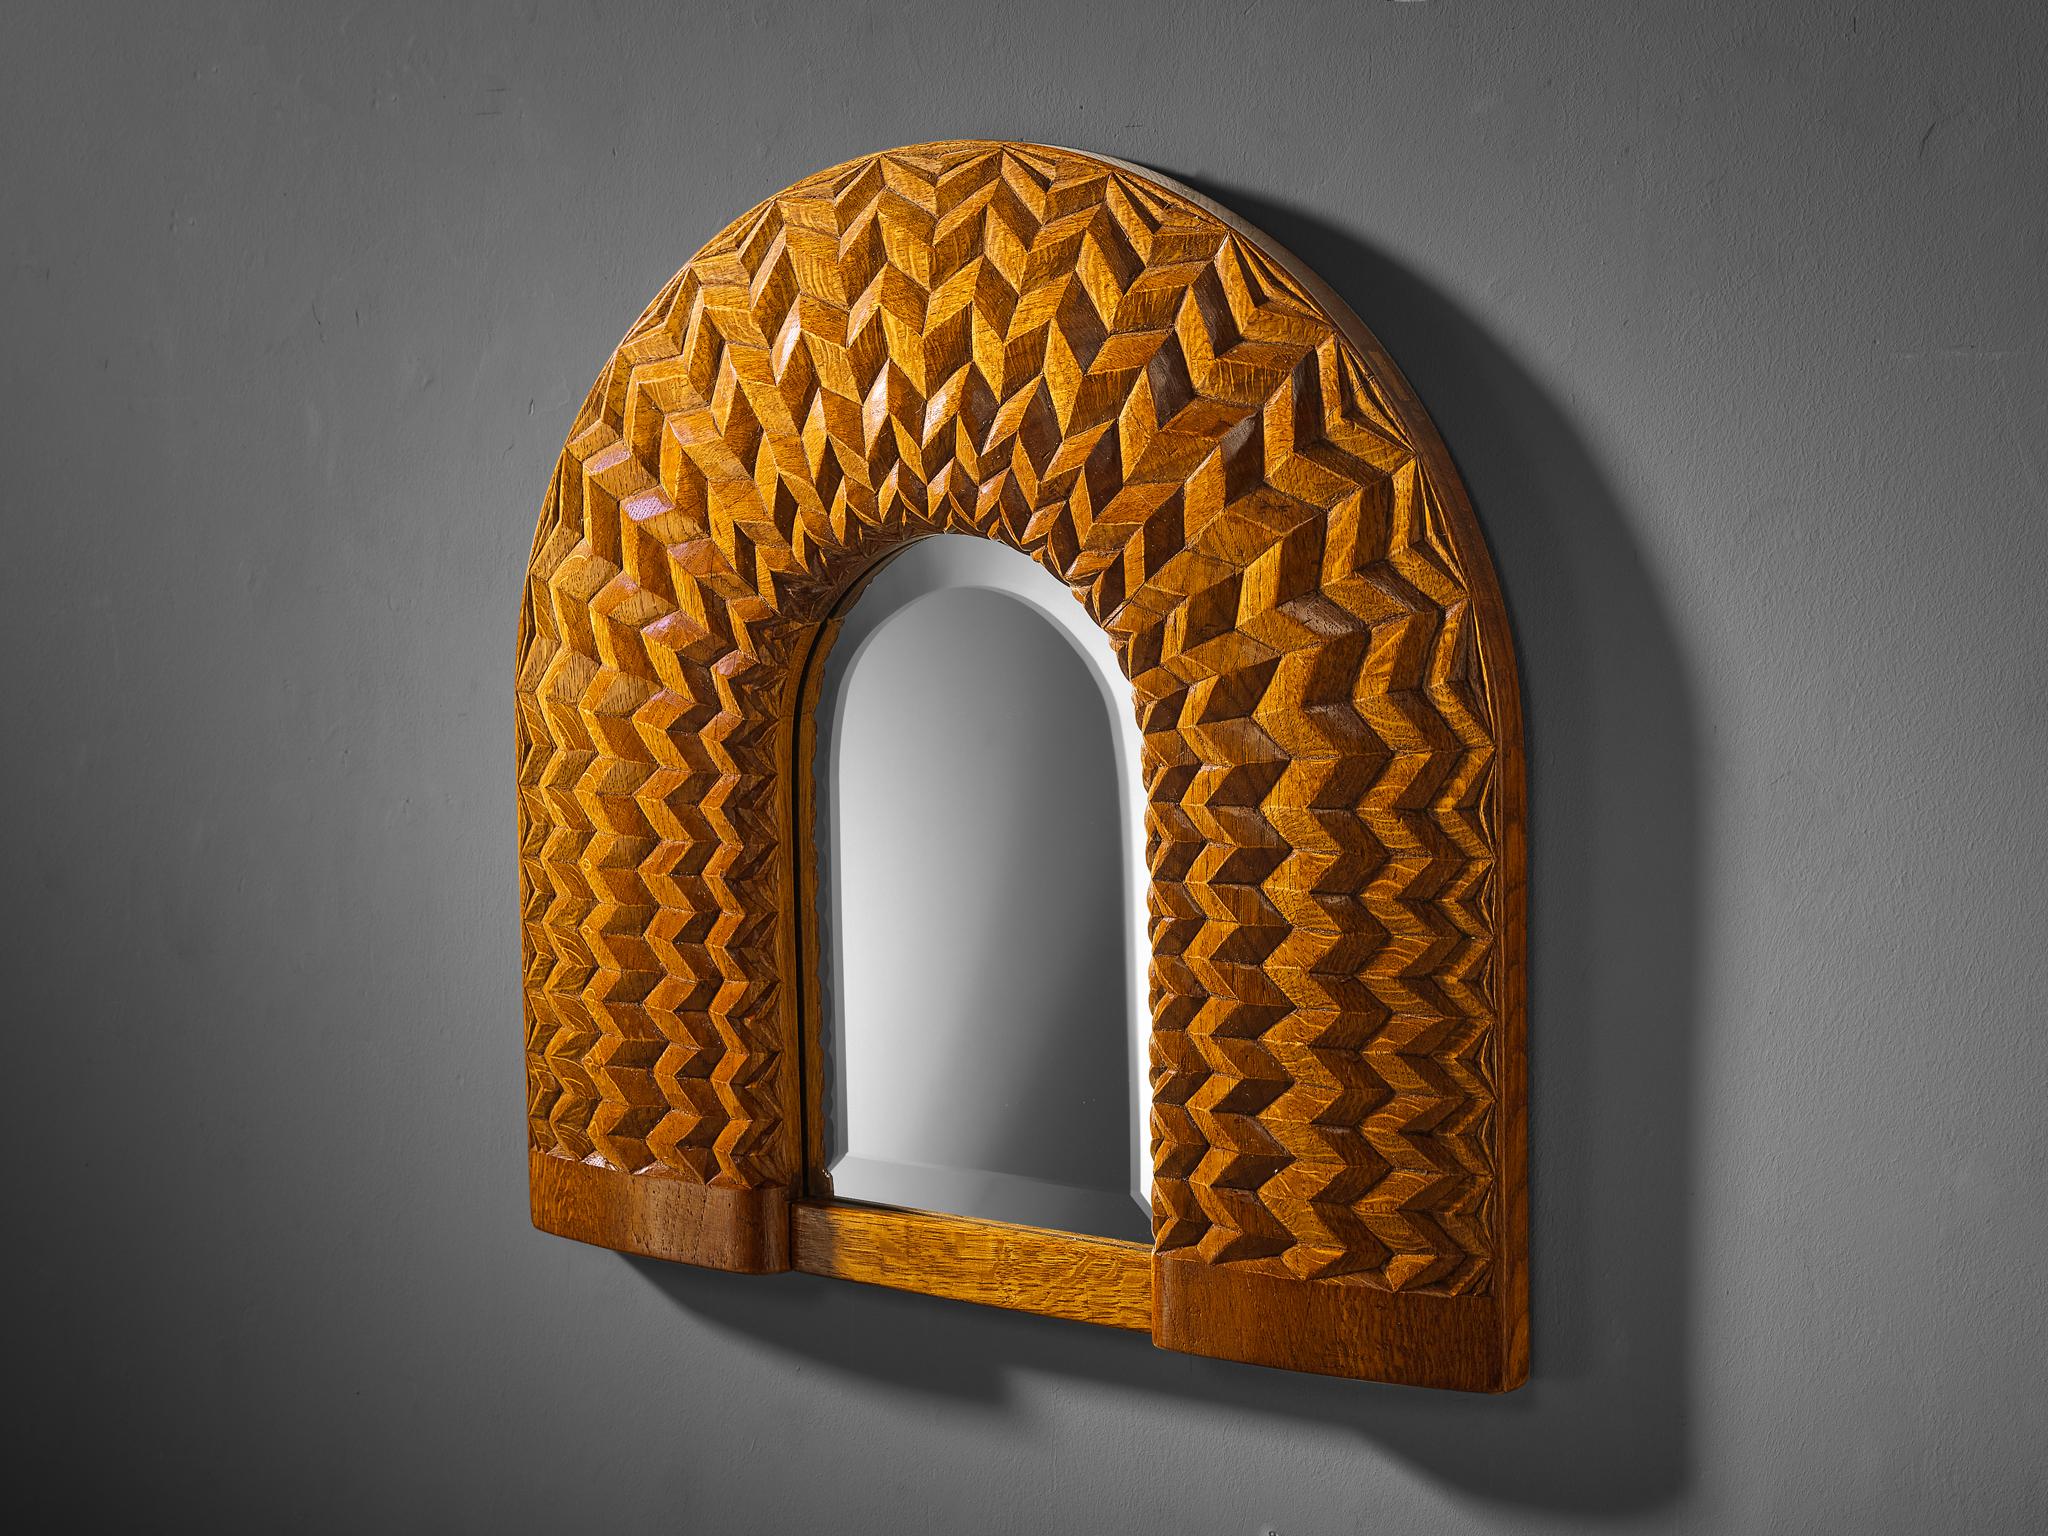 Giuseppe Rivadossi, oak, mirrored glass, Italy, 1970s

This delightful mirror, designed by Italian sculptor and artisan Giuseppe Rivadossi, is a good example of woodworking artistry. Its striking design features an arched framework with a series of